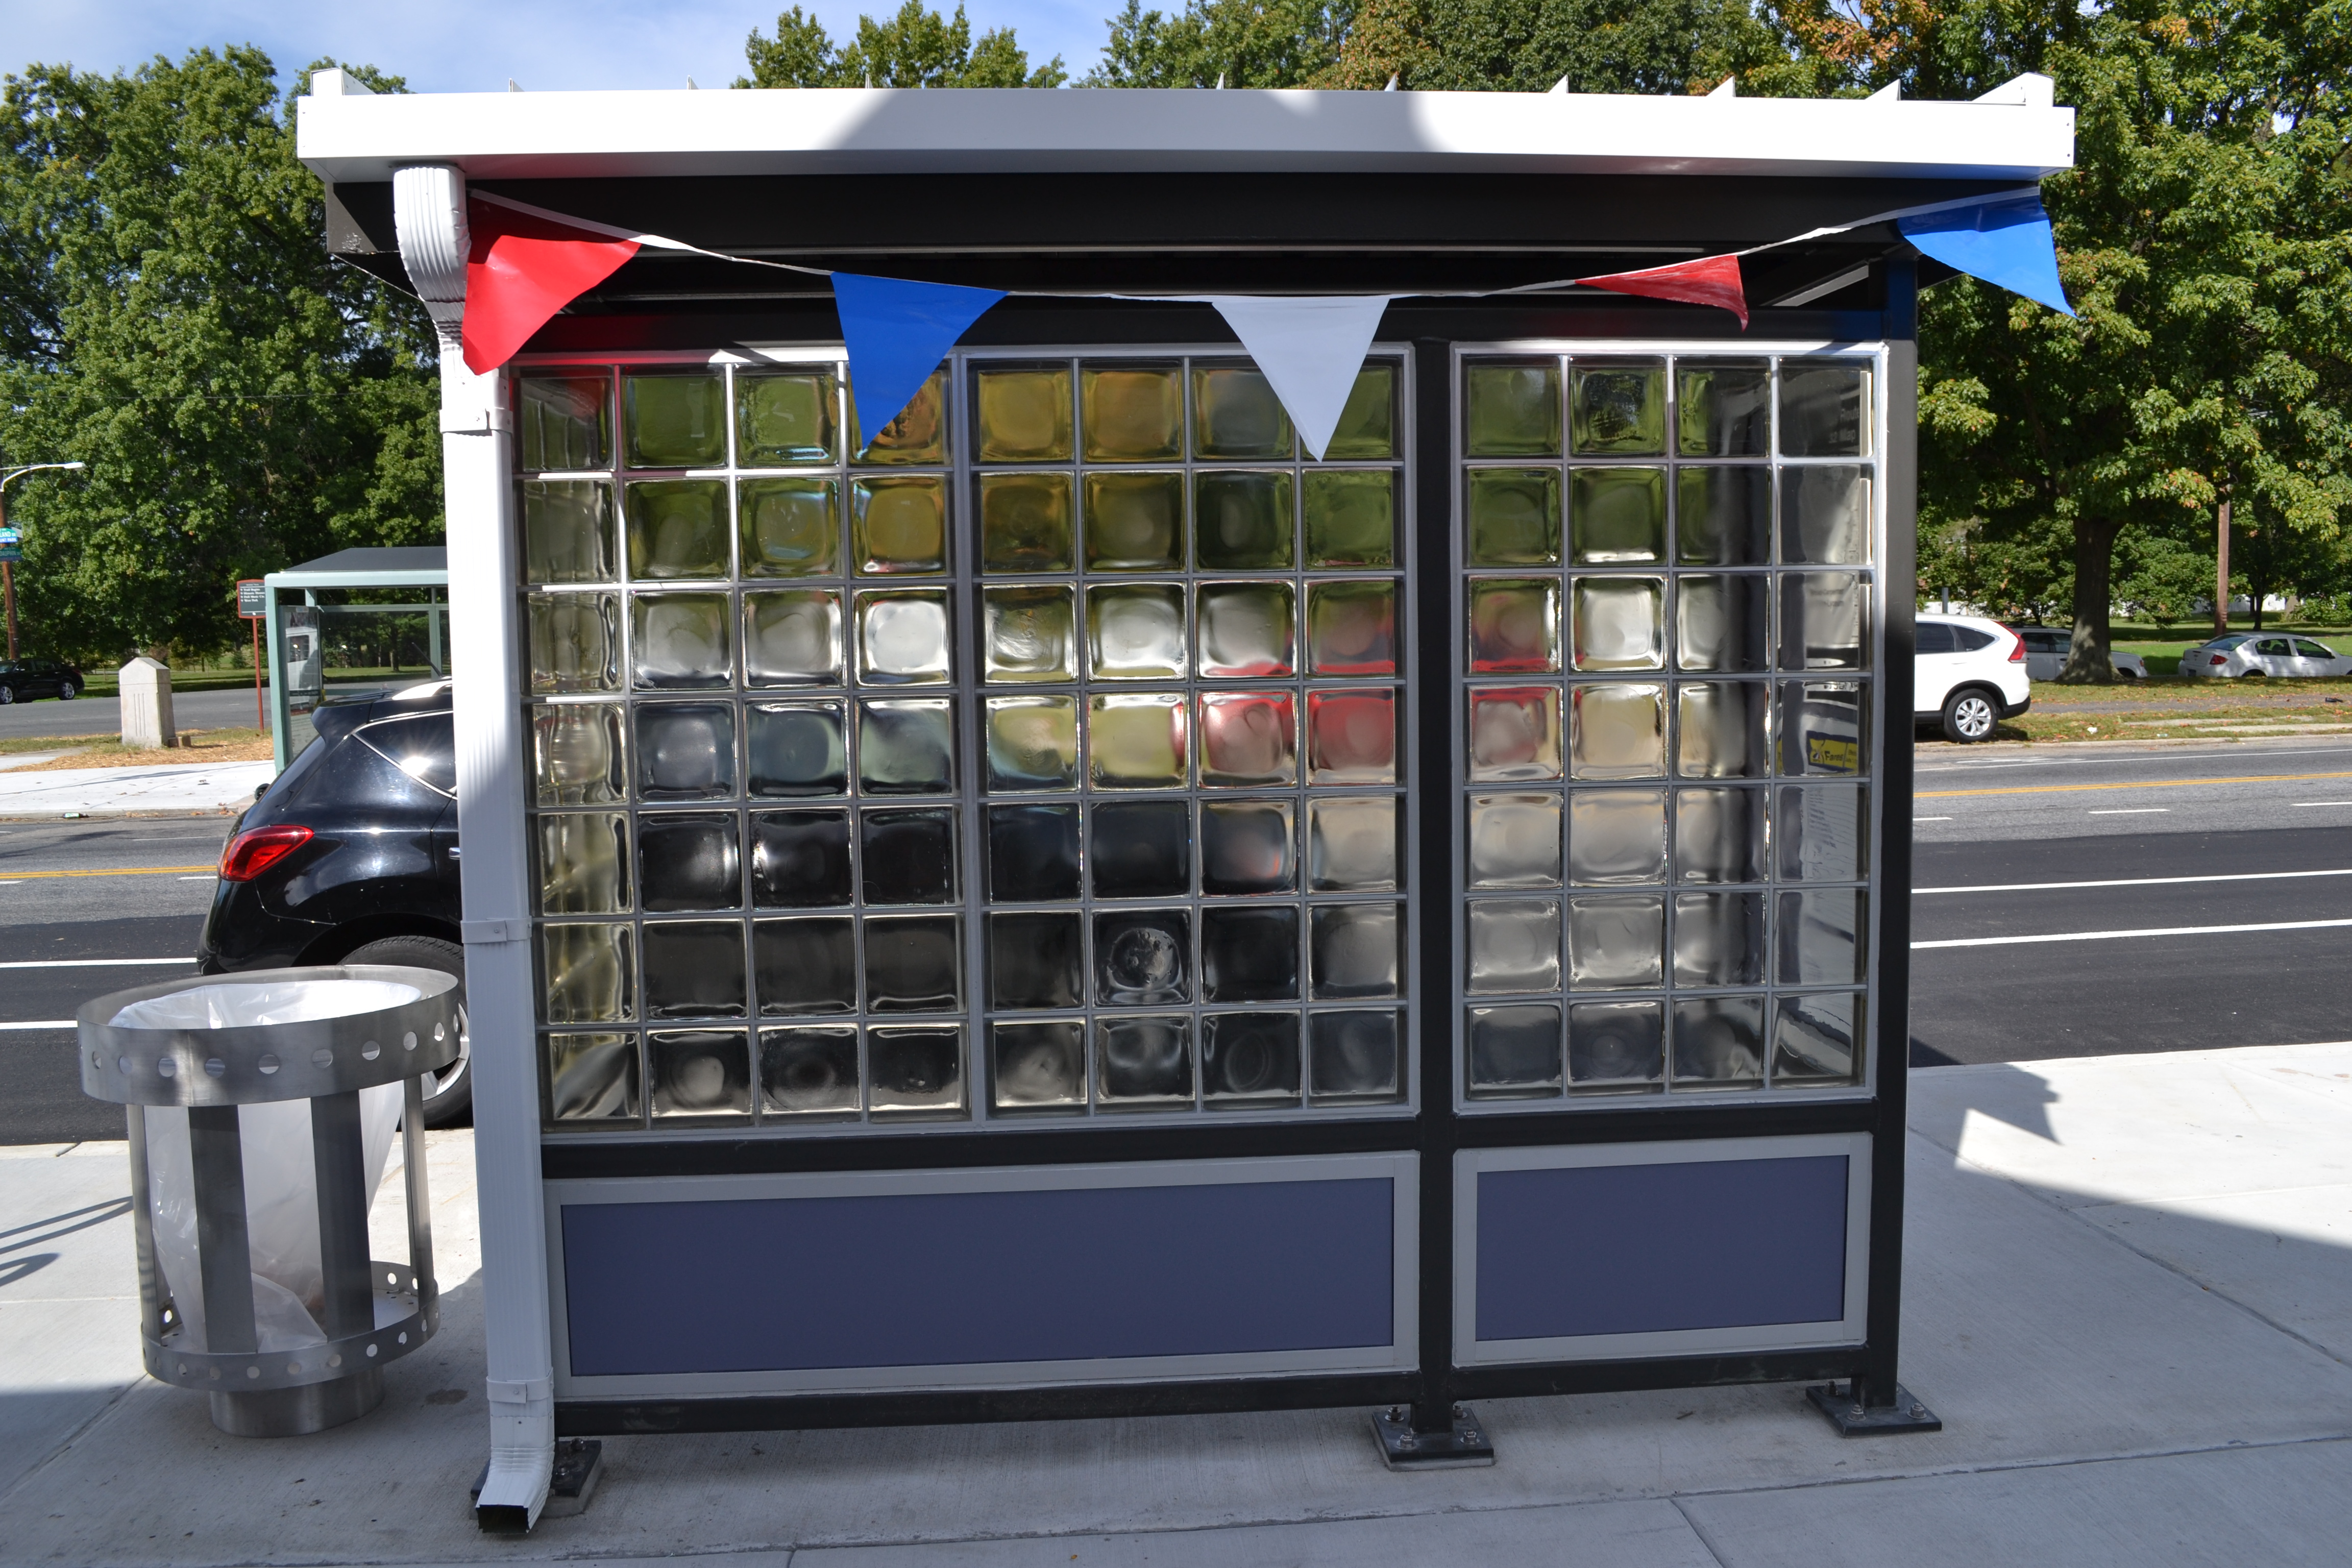 The project included installing new bus shelters around the perimeter of the bus loop